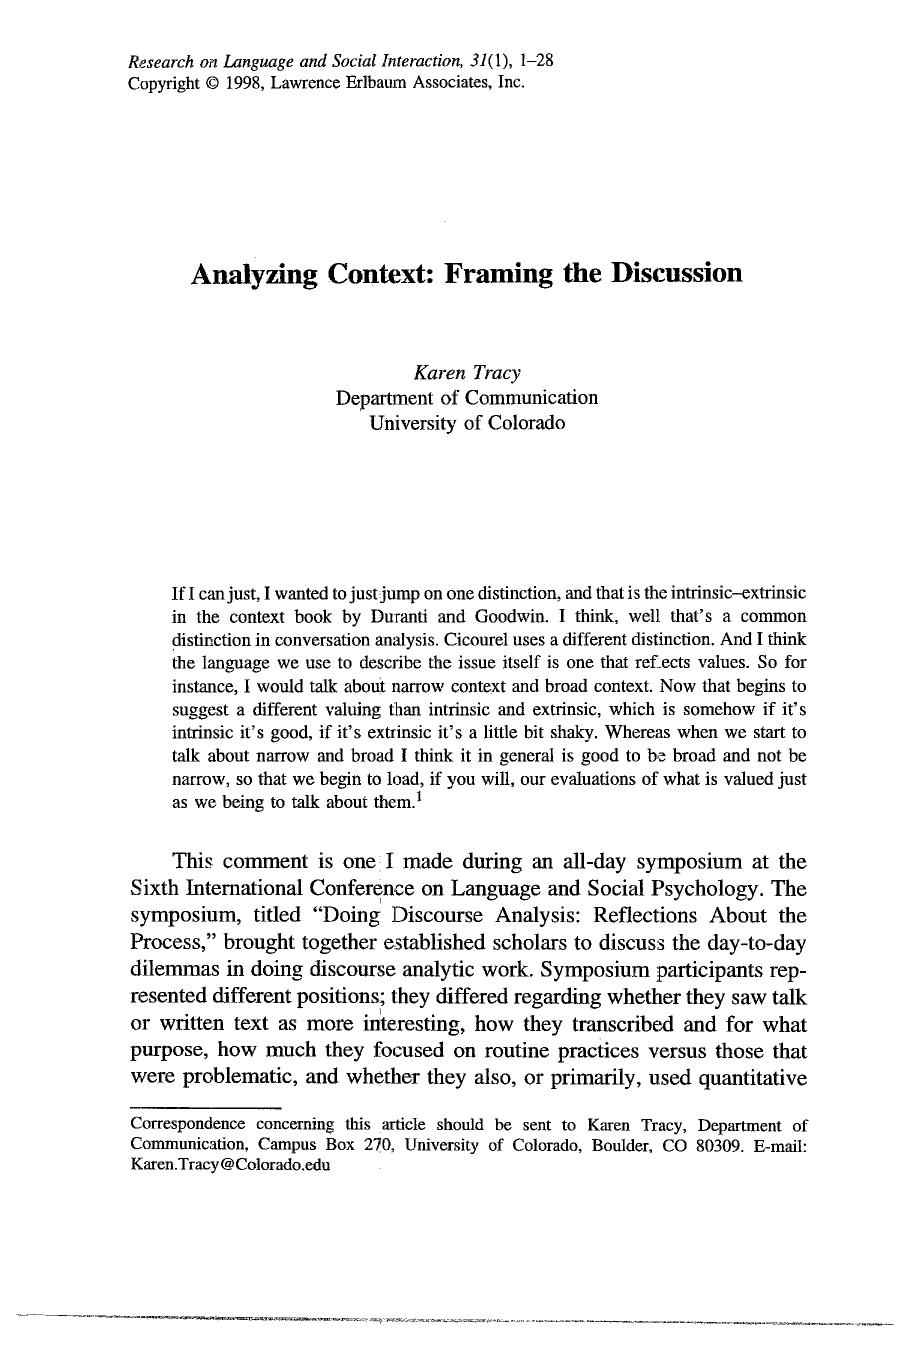 Analyzing Context: Framing the Discussion.